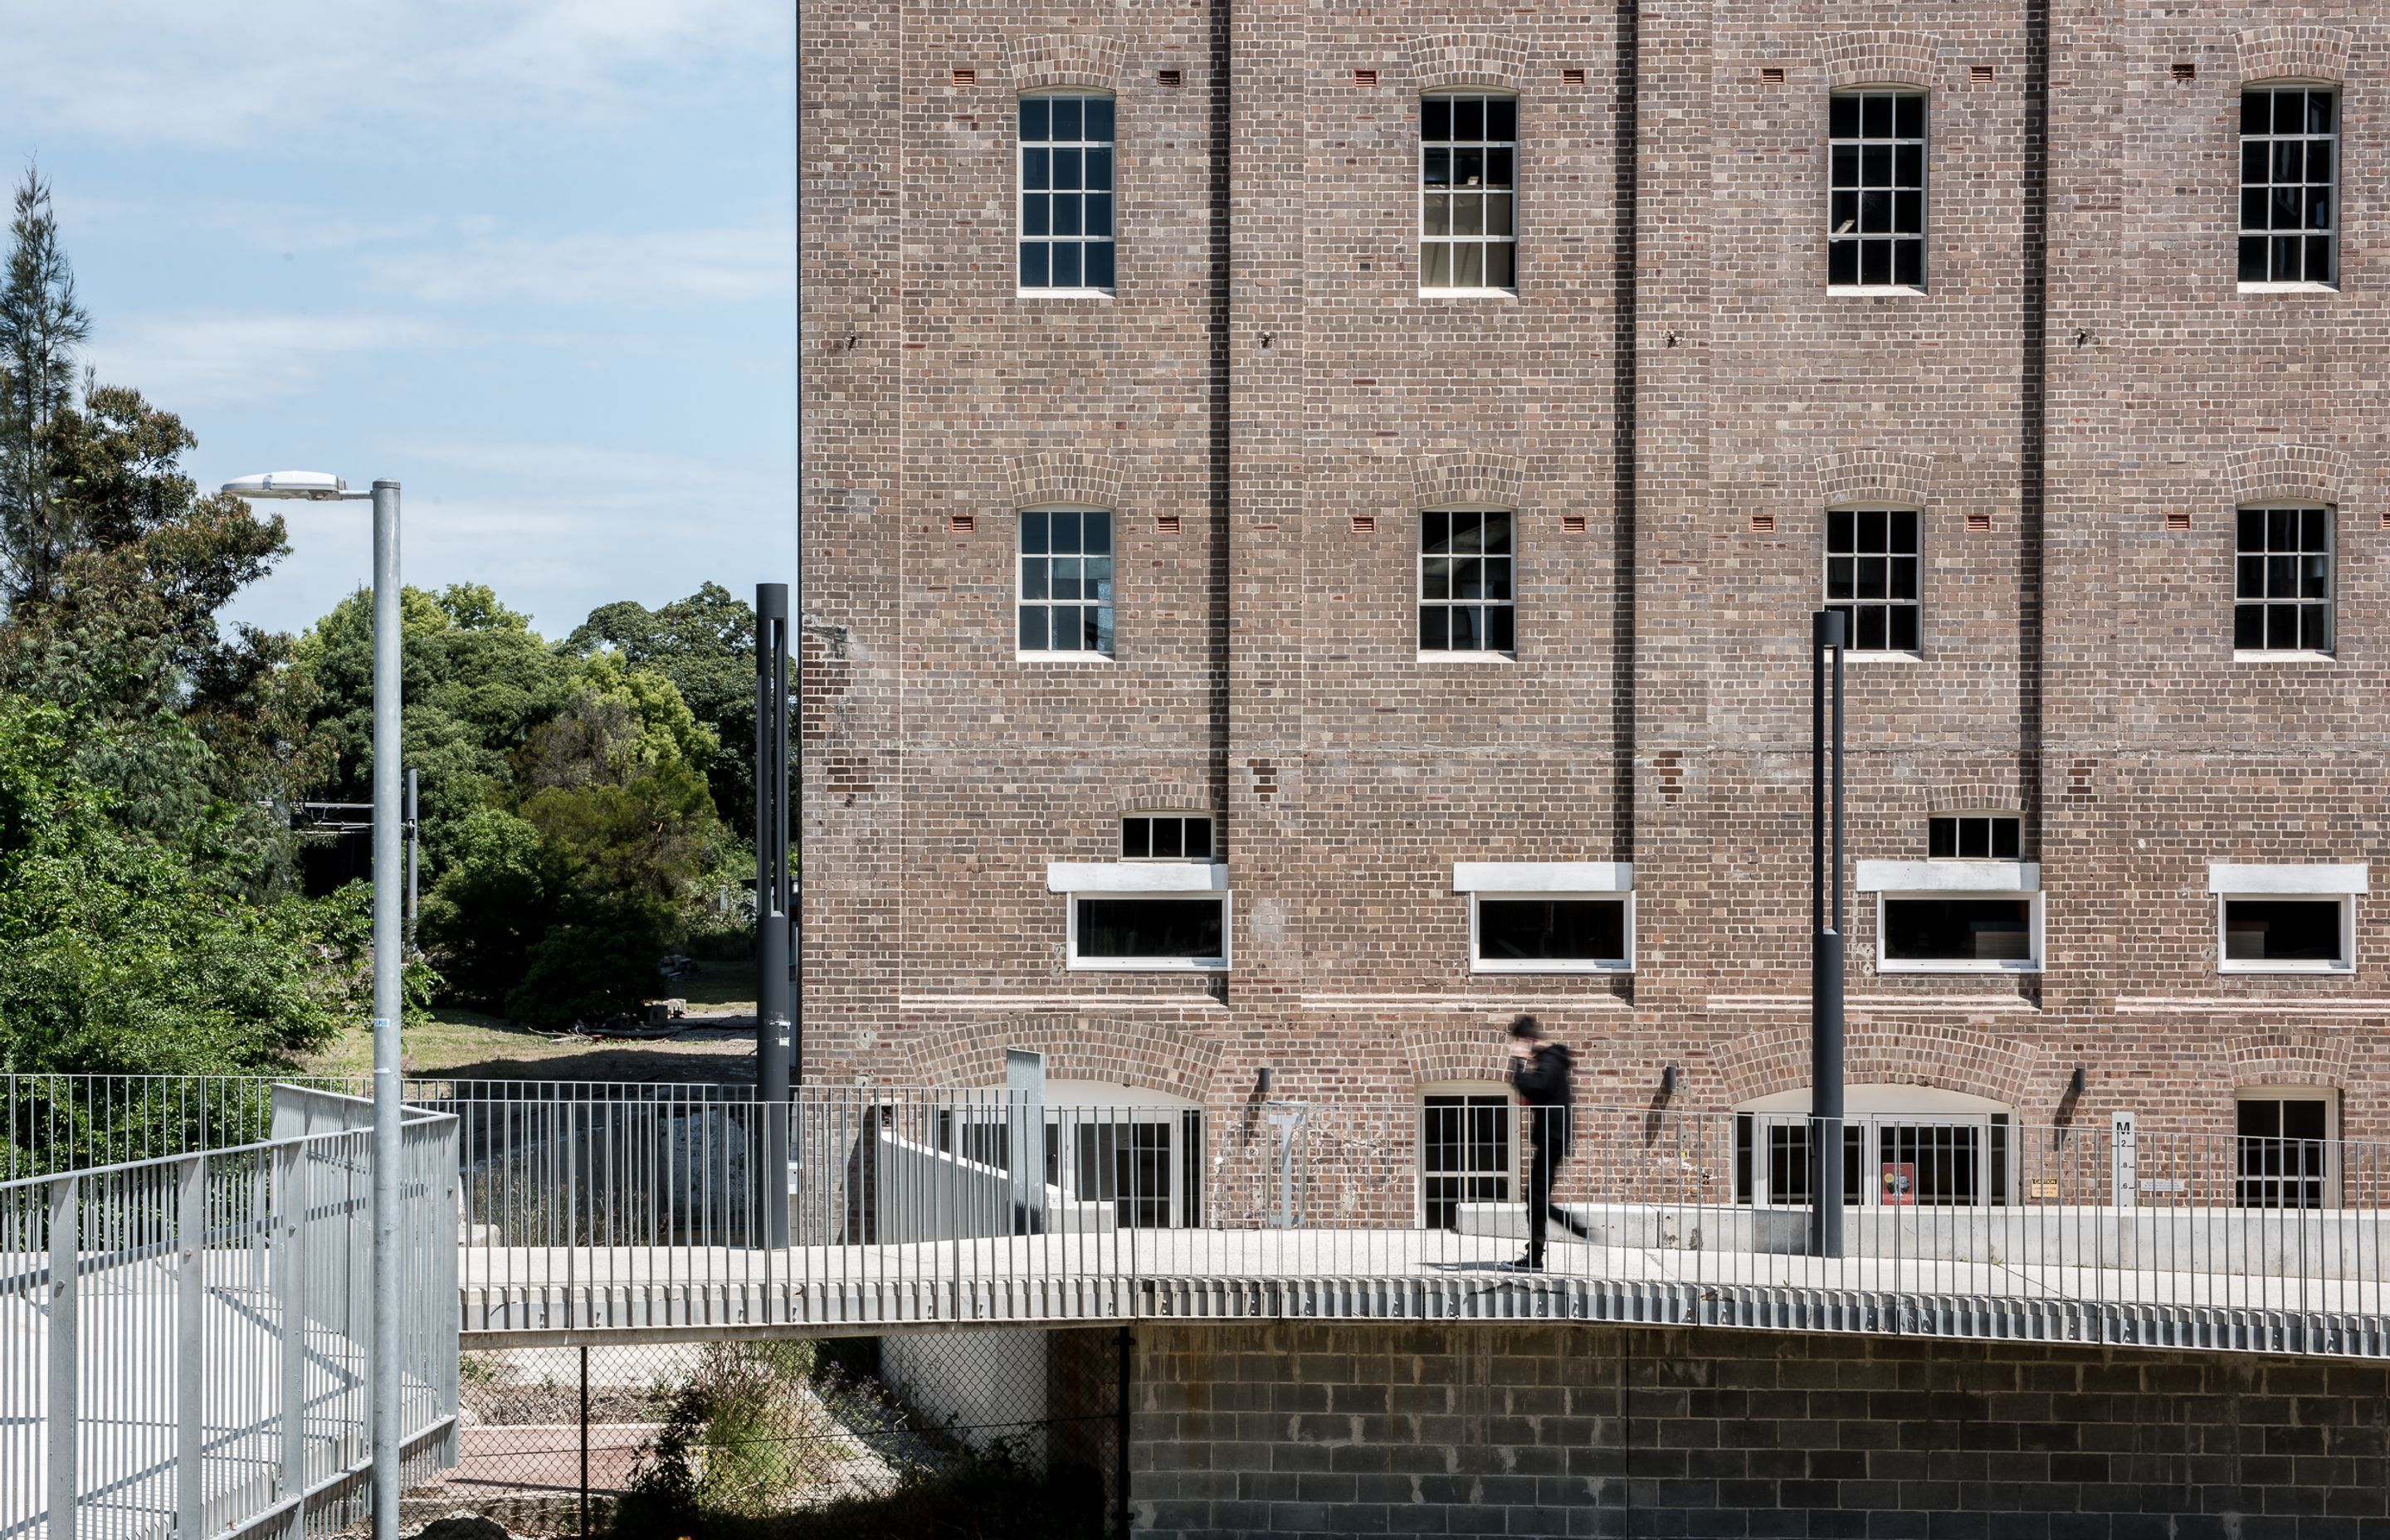 The Flour Mill at Summer Hill